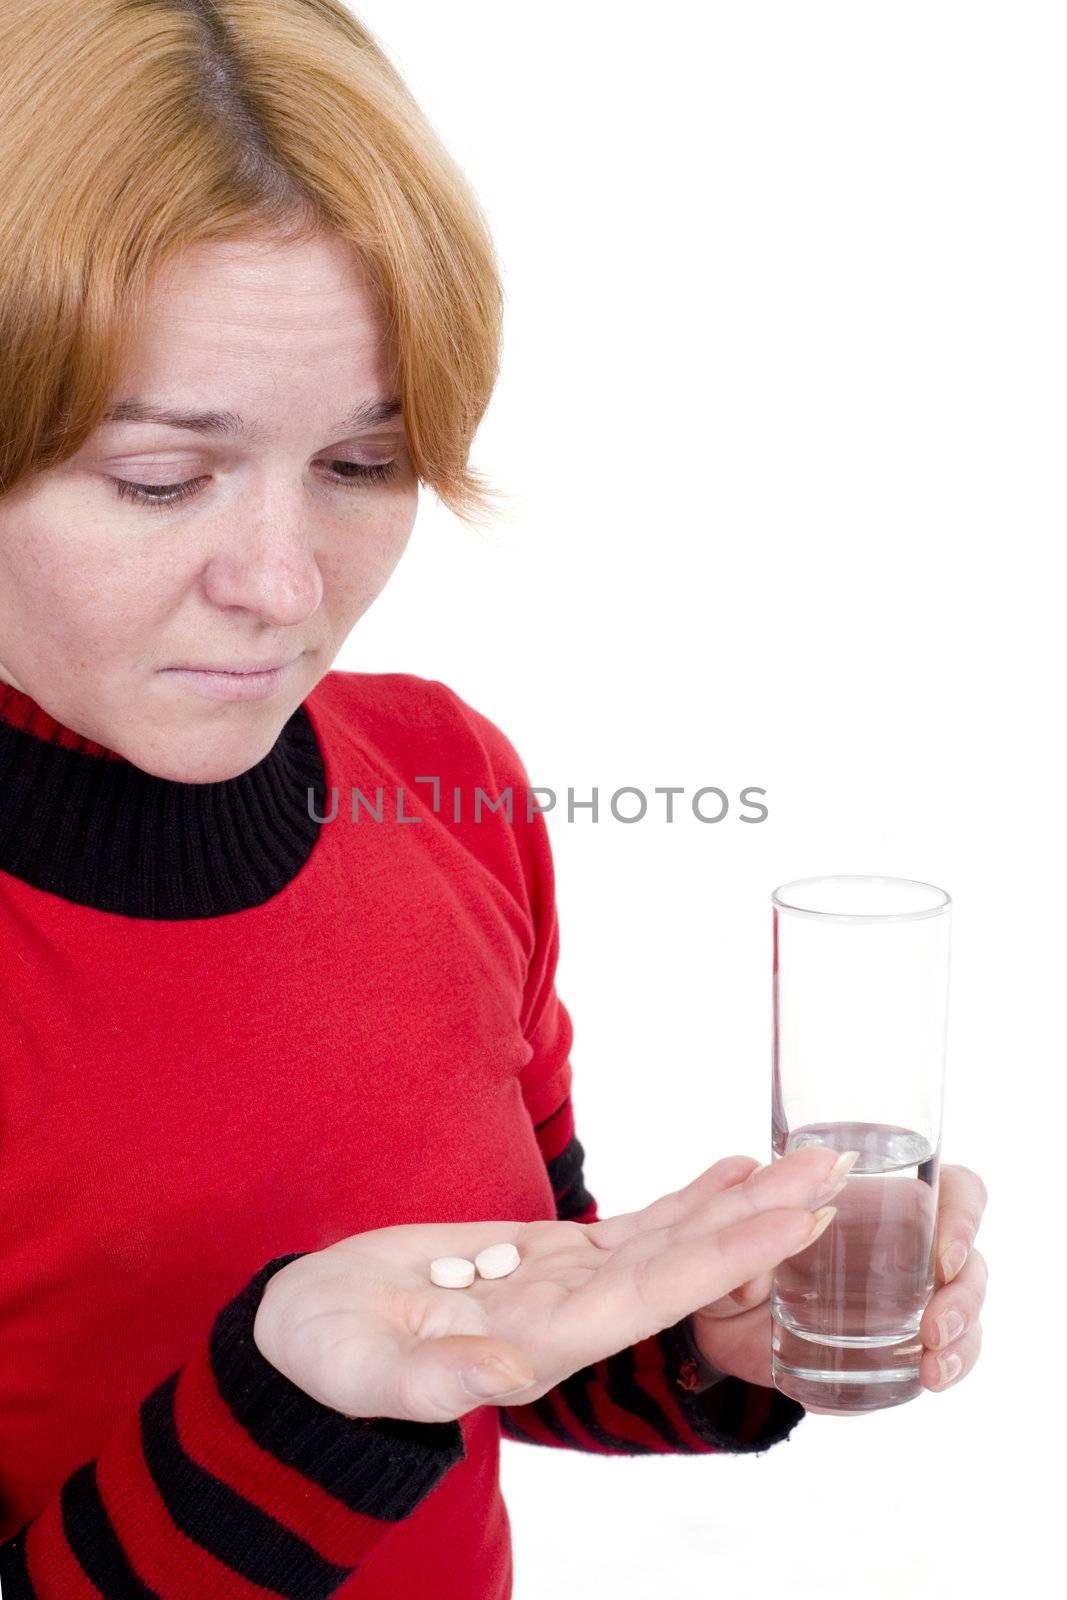 The sick girl with tablets and a glass